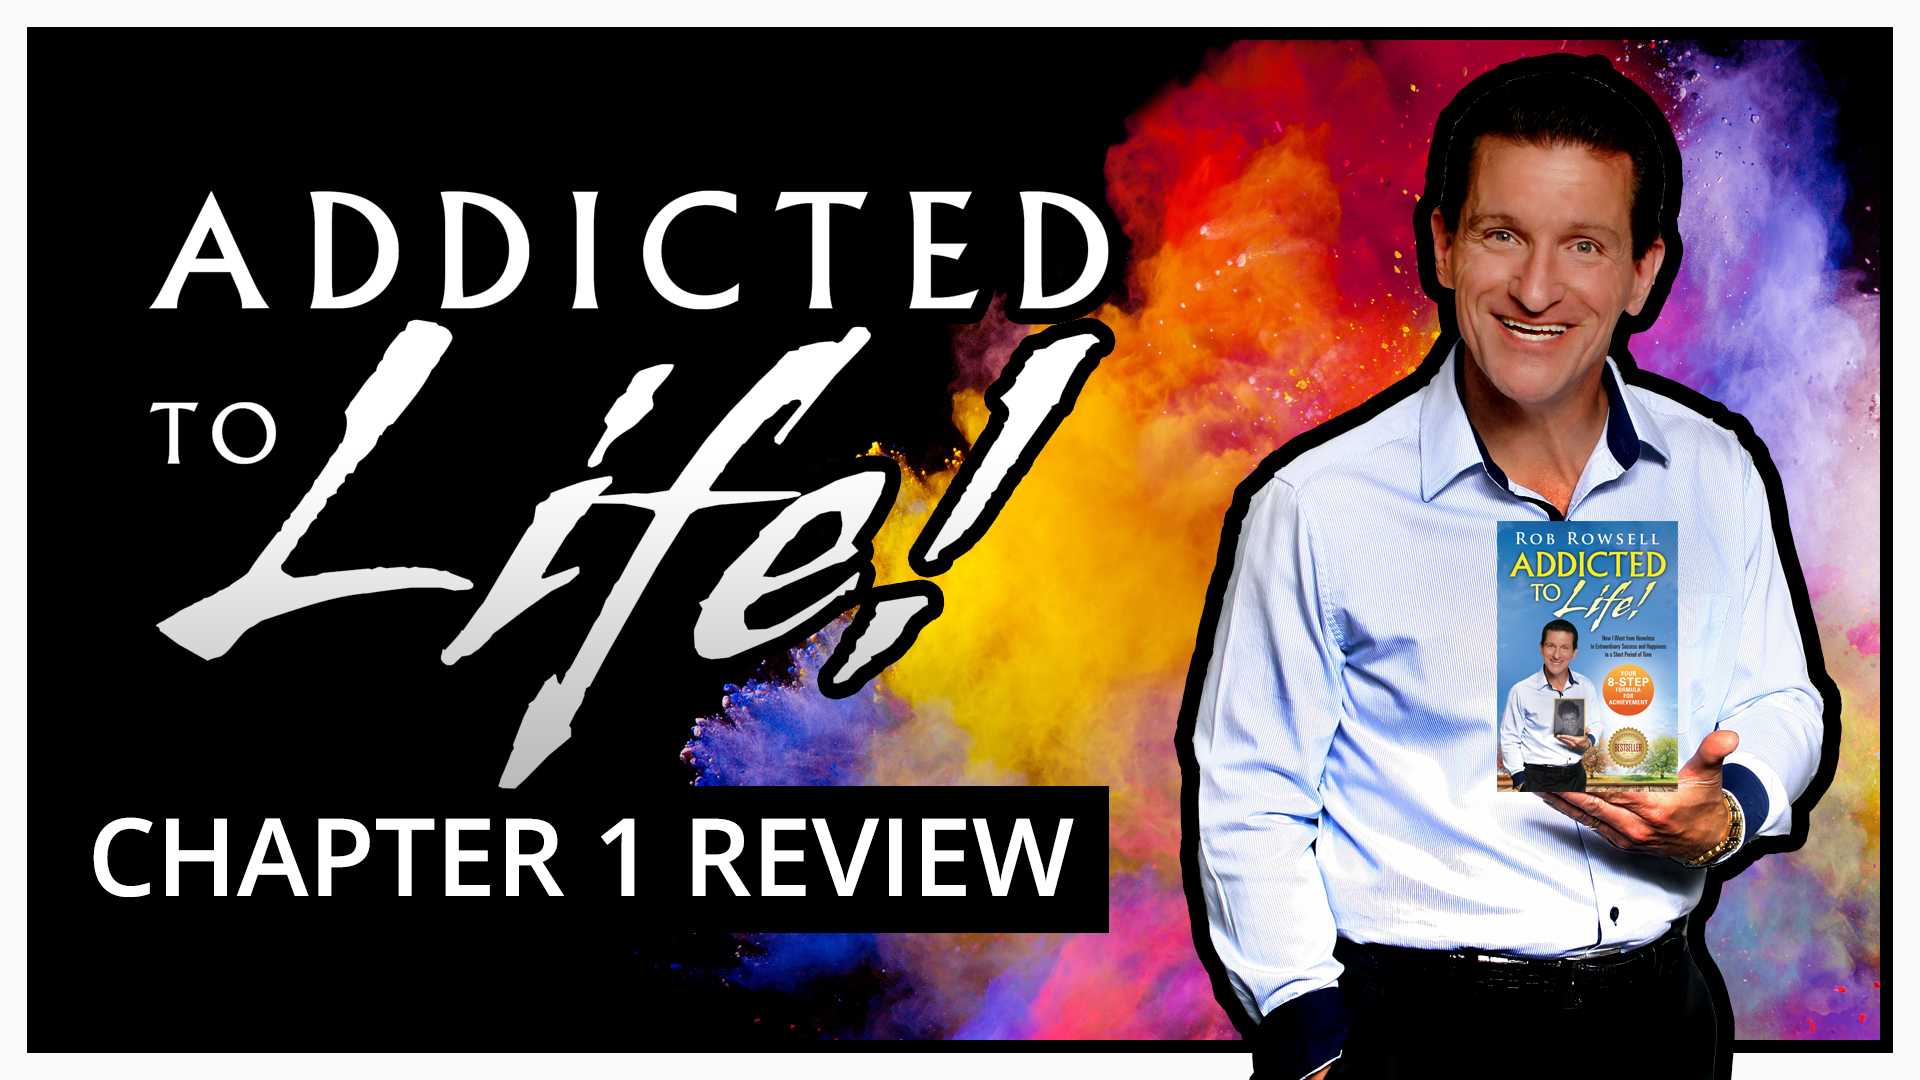 "Addicted to Life" Chapter 1 Review - You Have Got to Be Done!